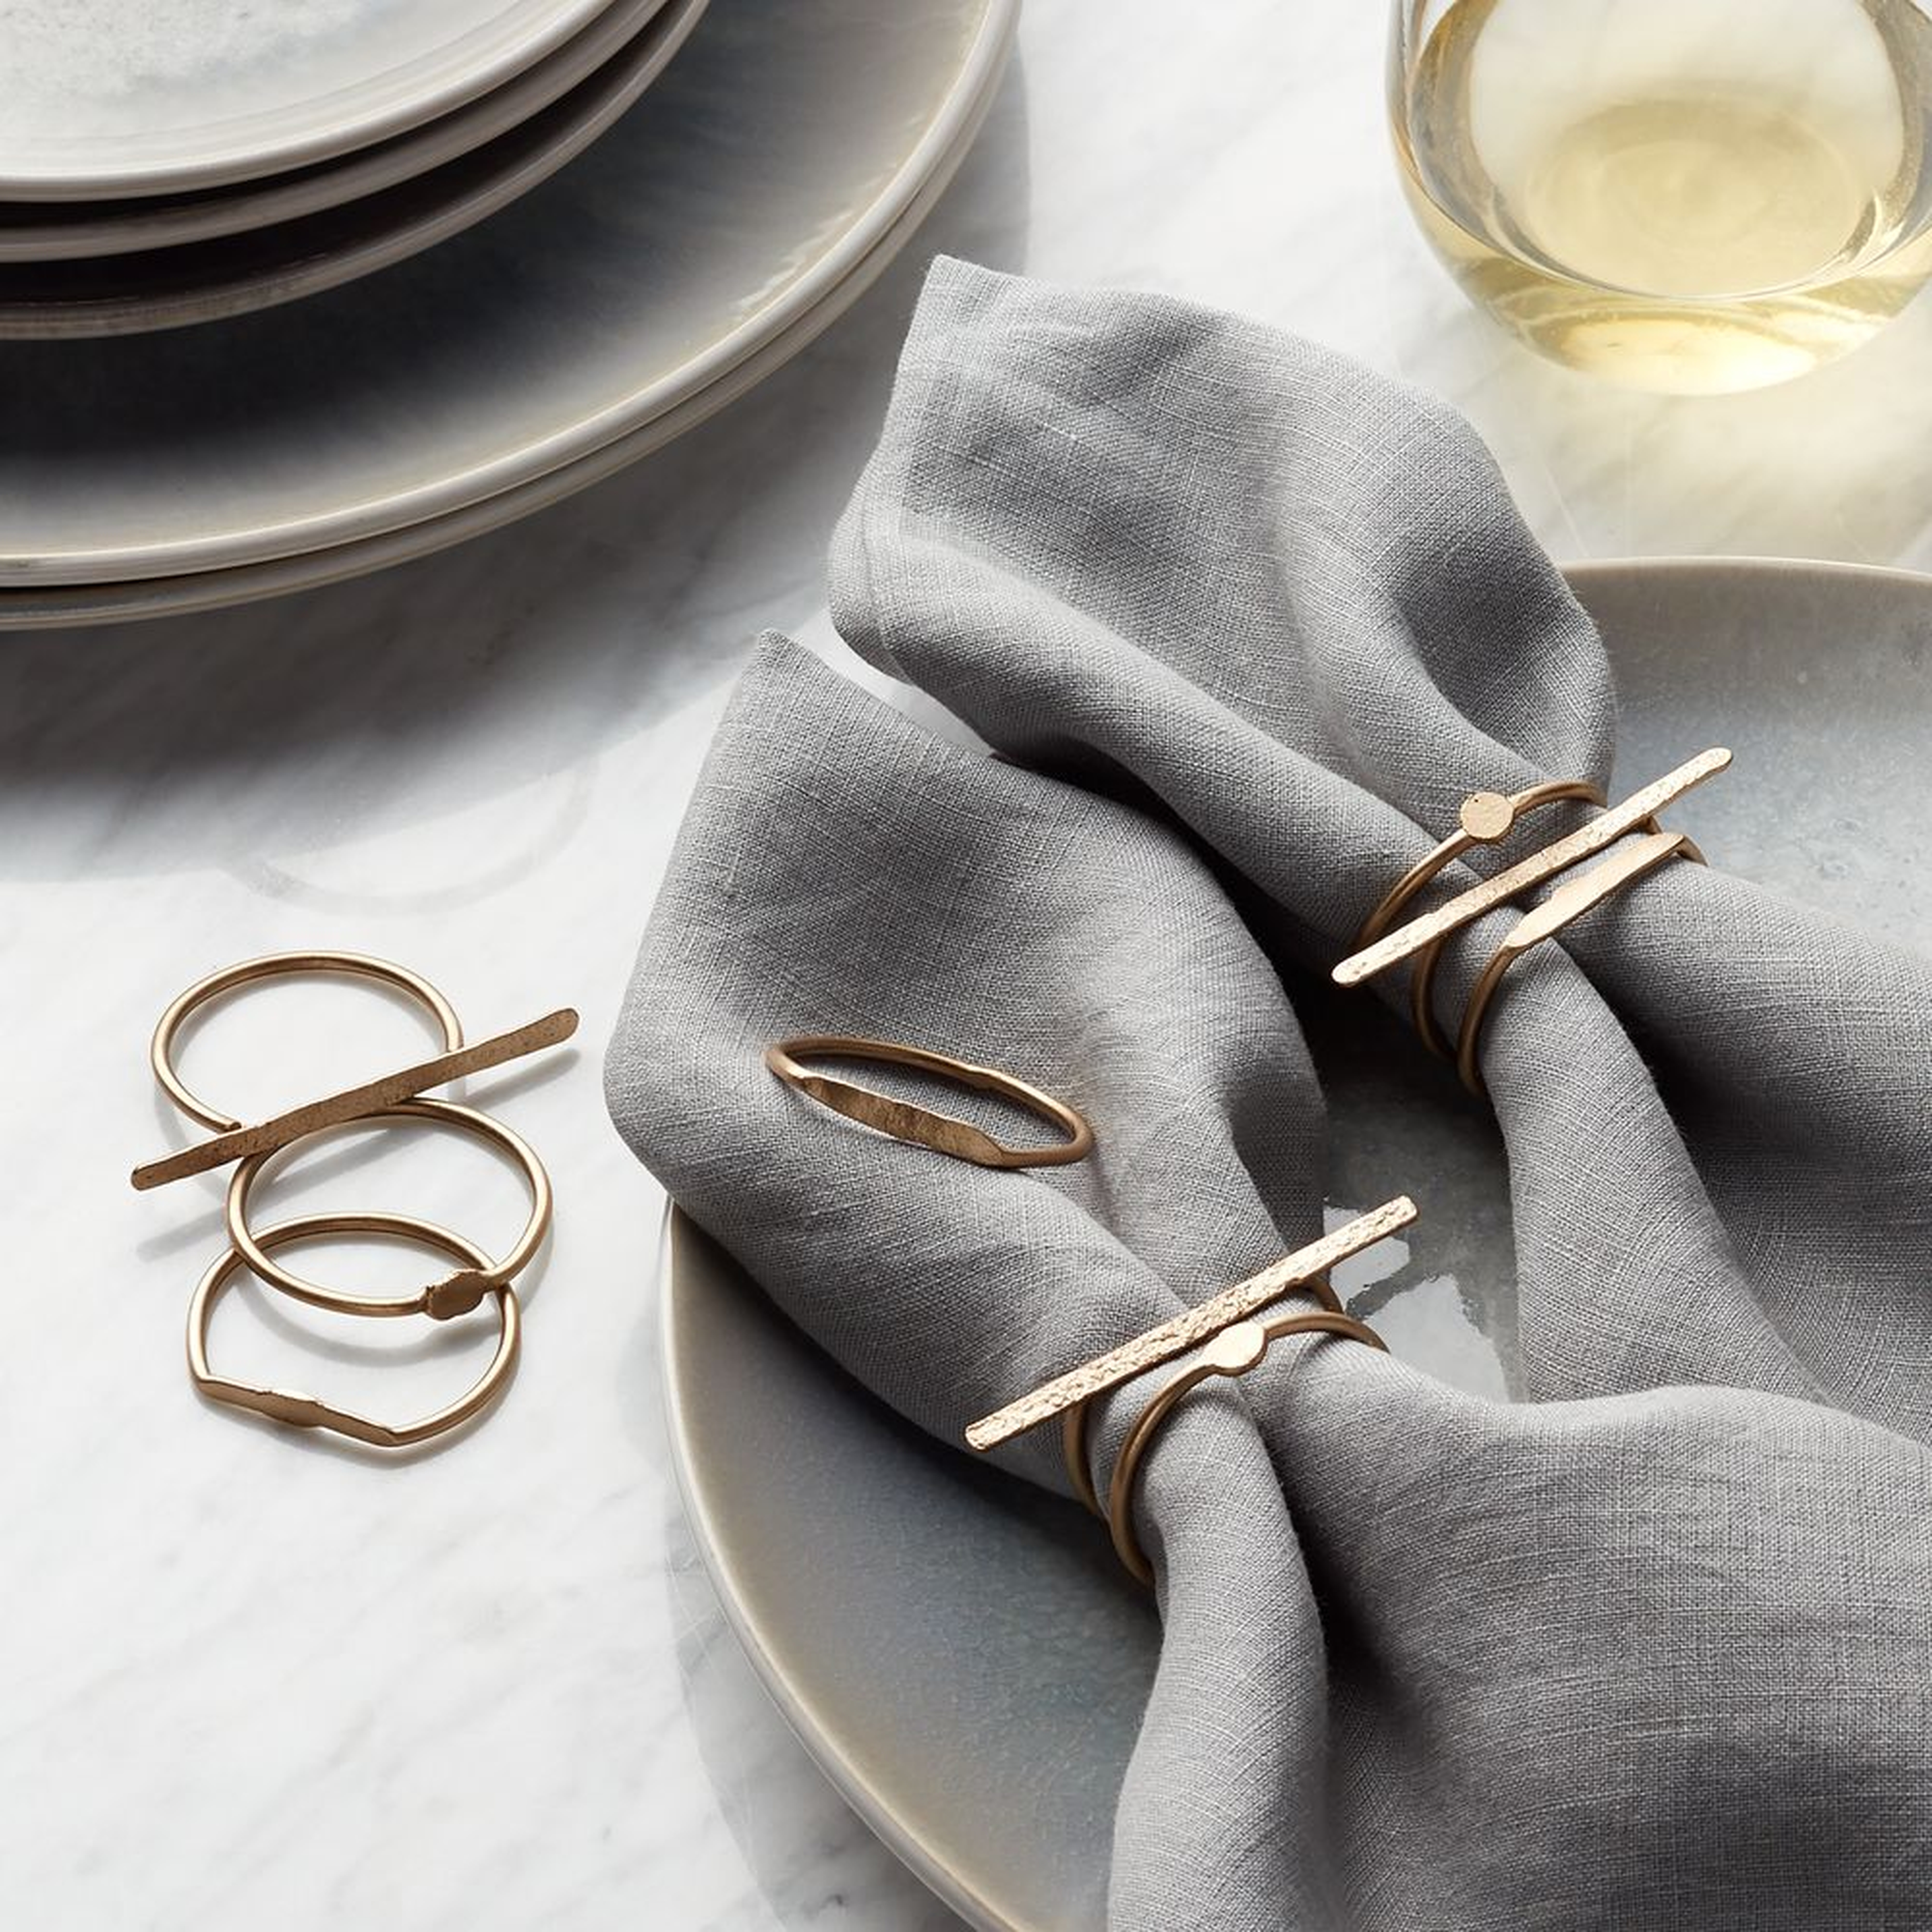 Dainty Gold Napkin Rings, Set of 3 - Crate and Barrel